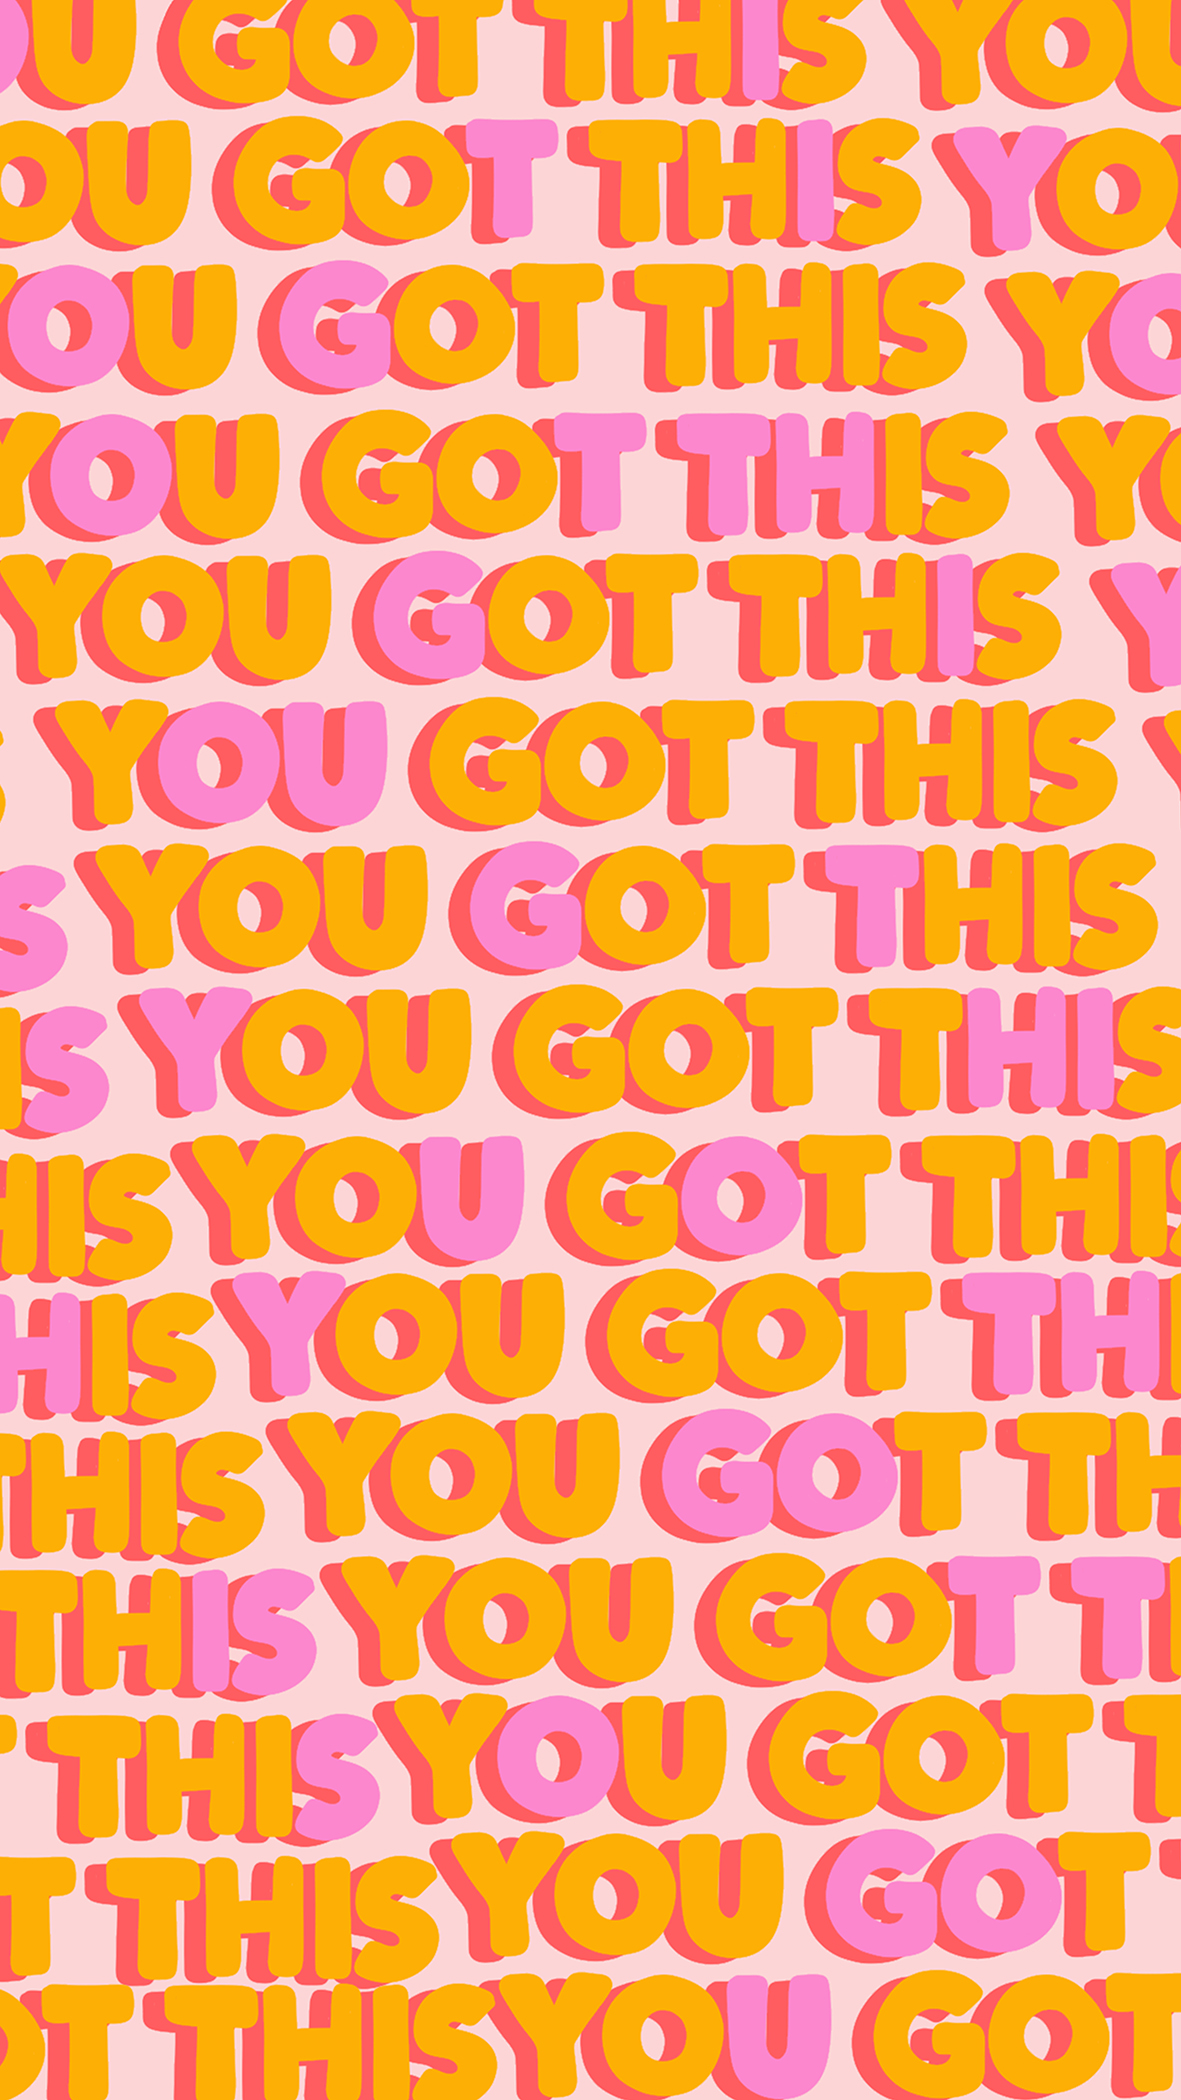 You Got This Wallpapers